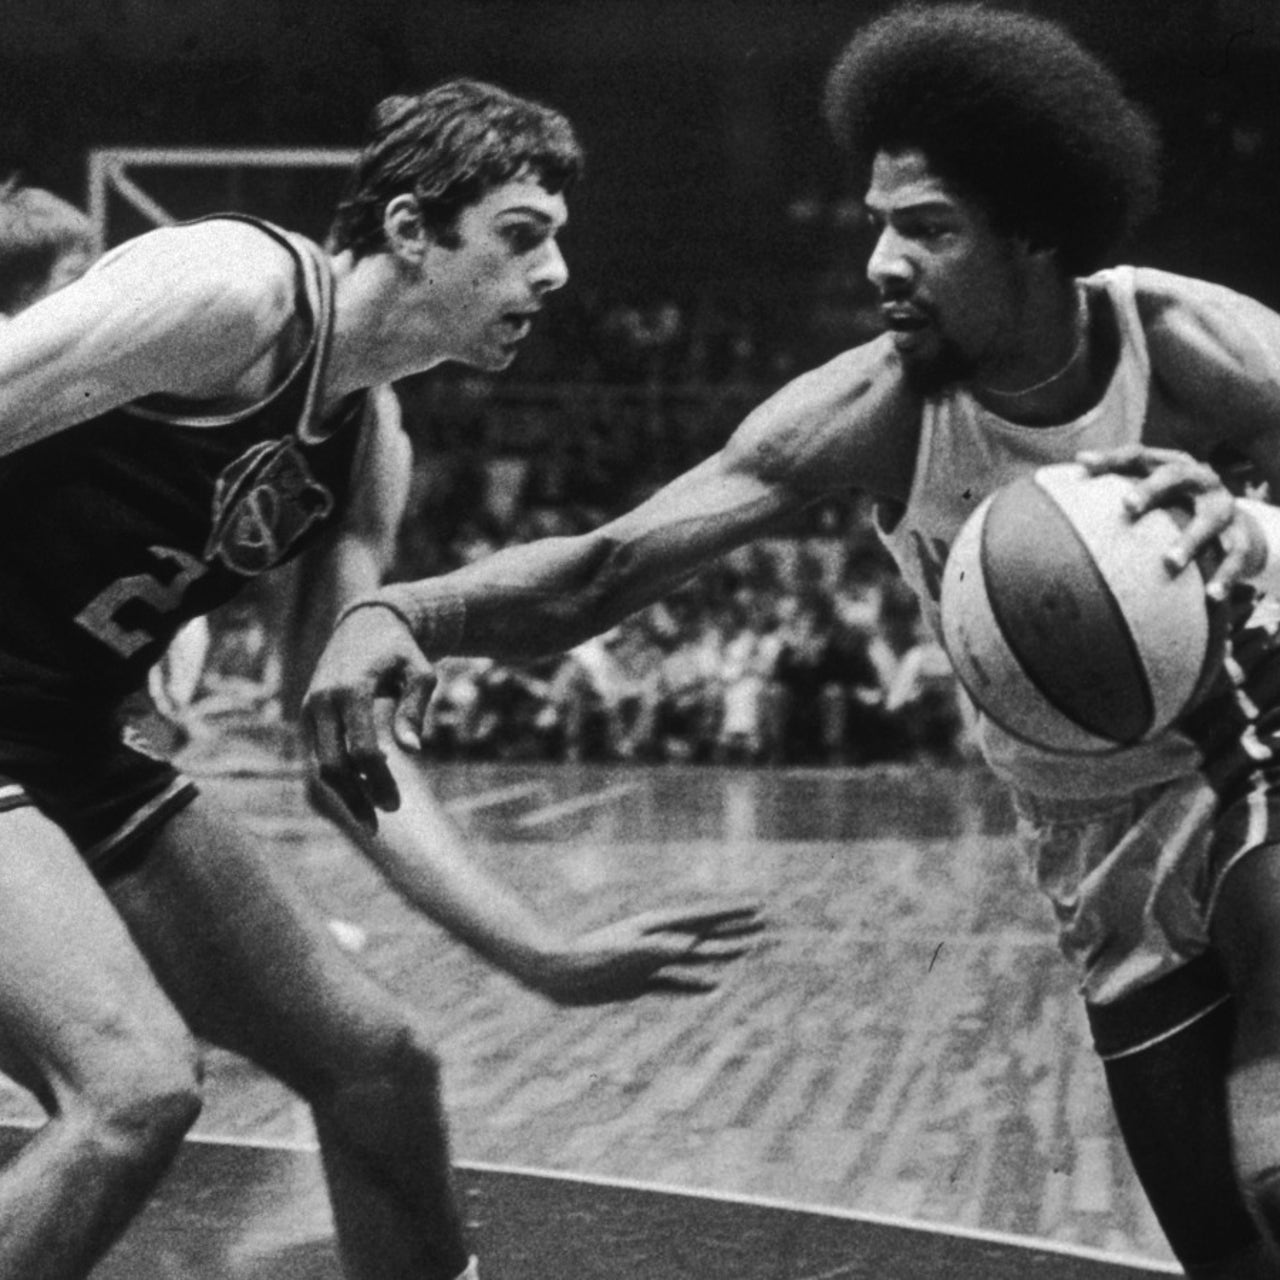 The NBA has abandoned former ABA greats who helped shape the game